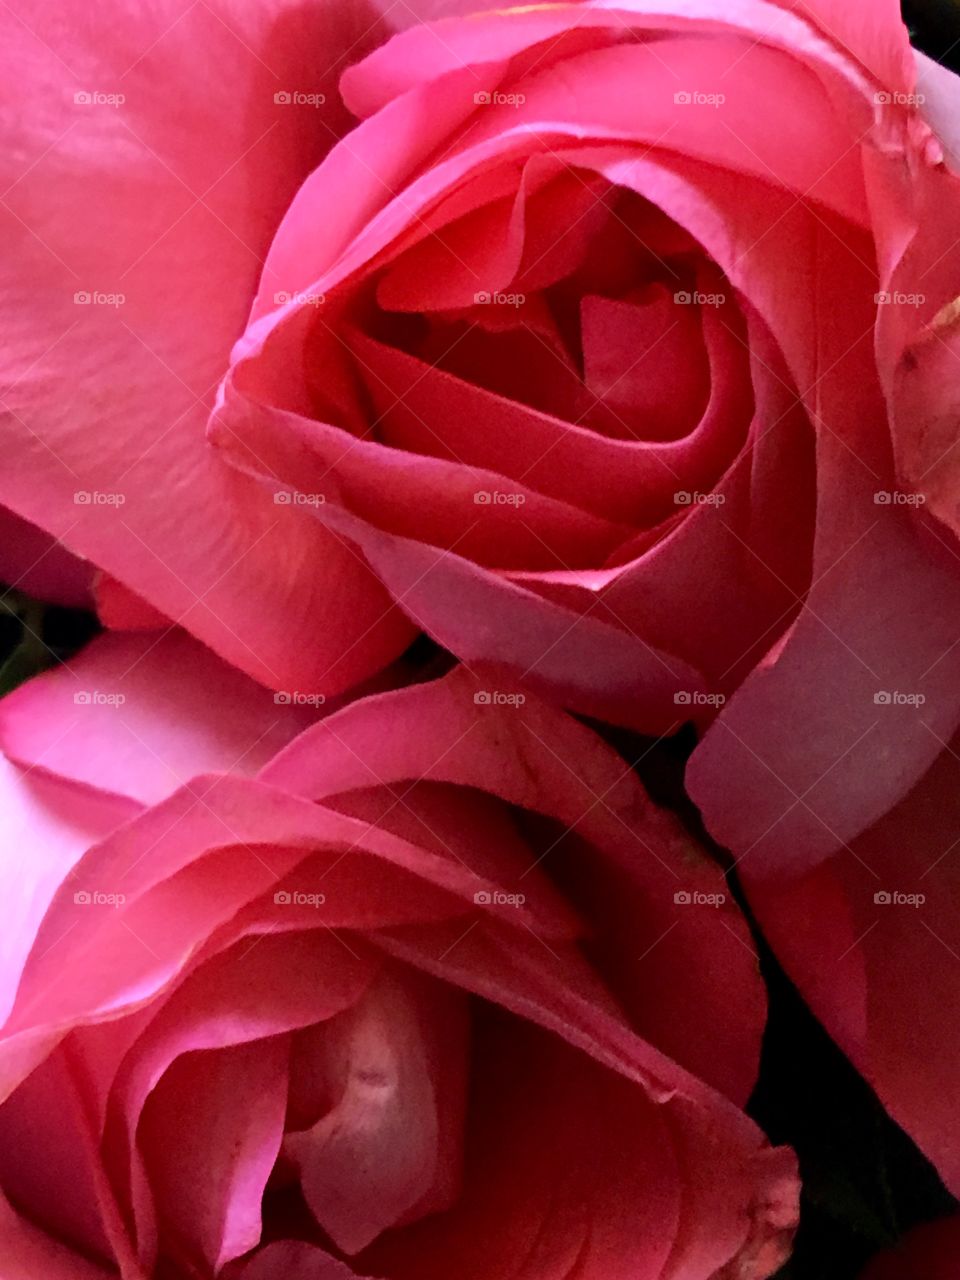 A pair of pink roses upclose